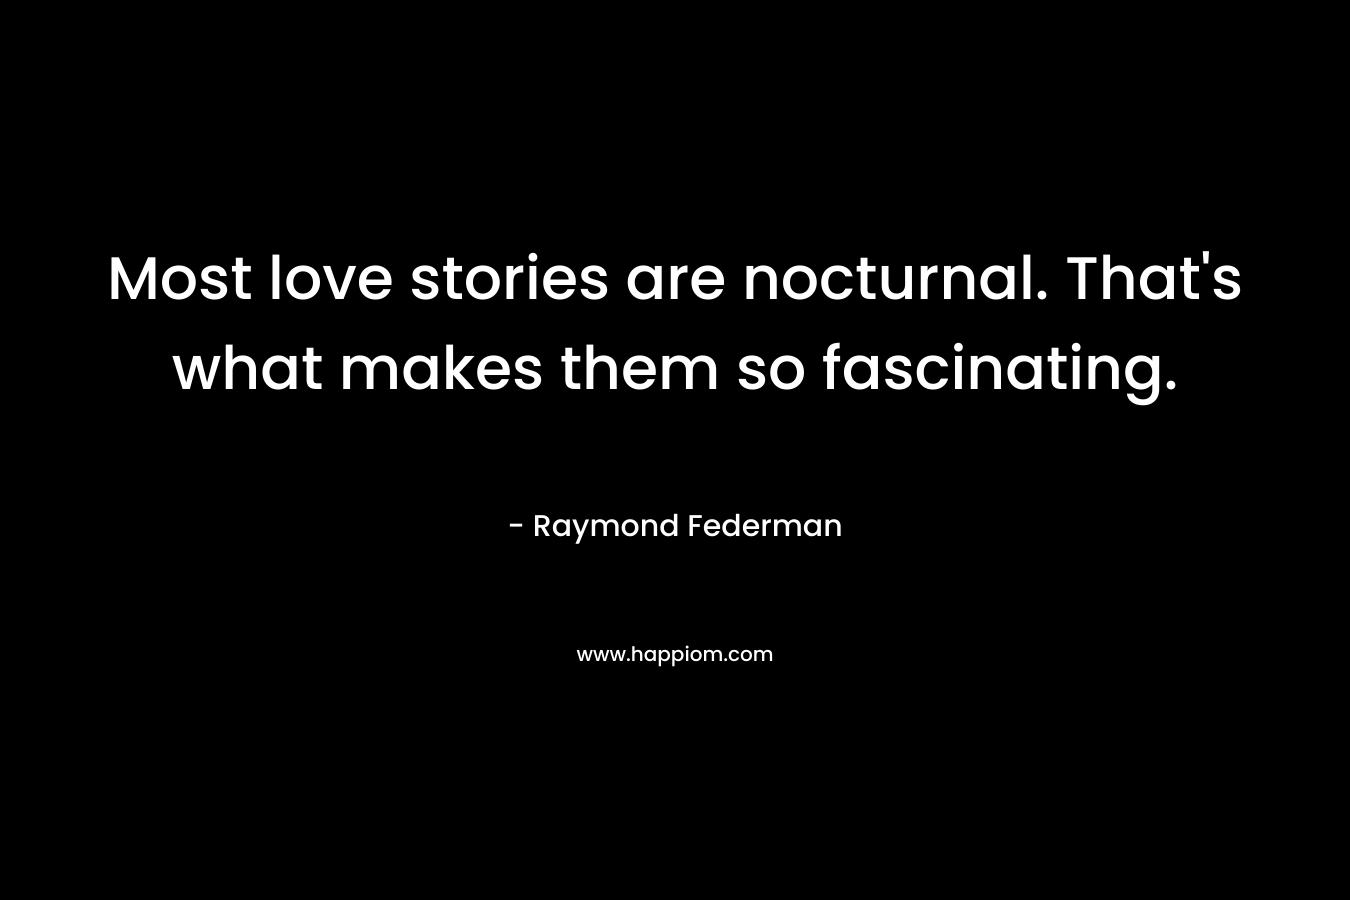 Most love stories are nocturnal. That’s what makes them so fascinating. – Raymond Federman